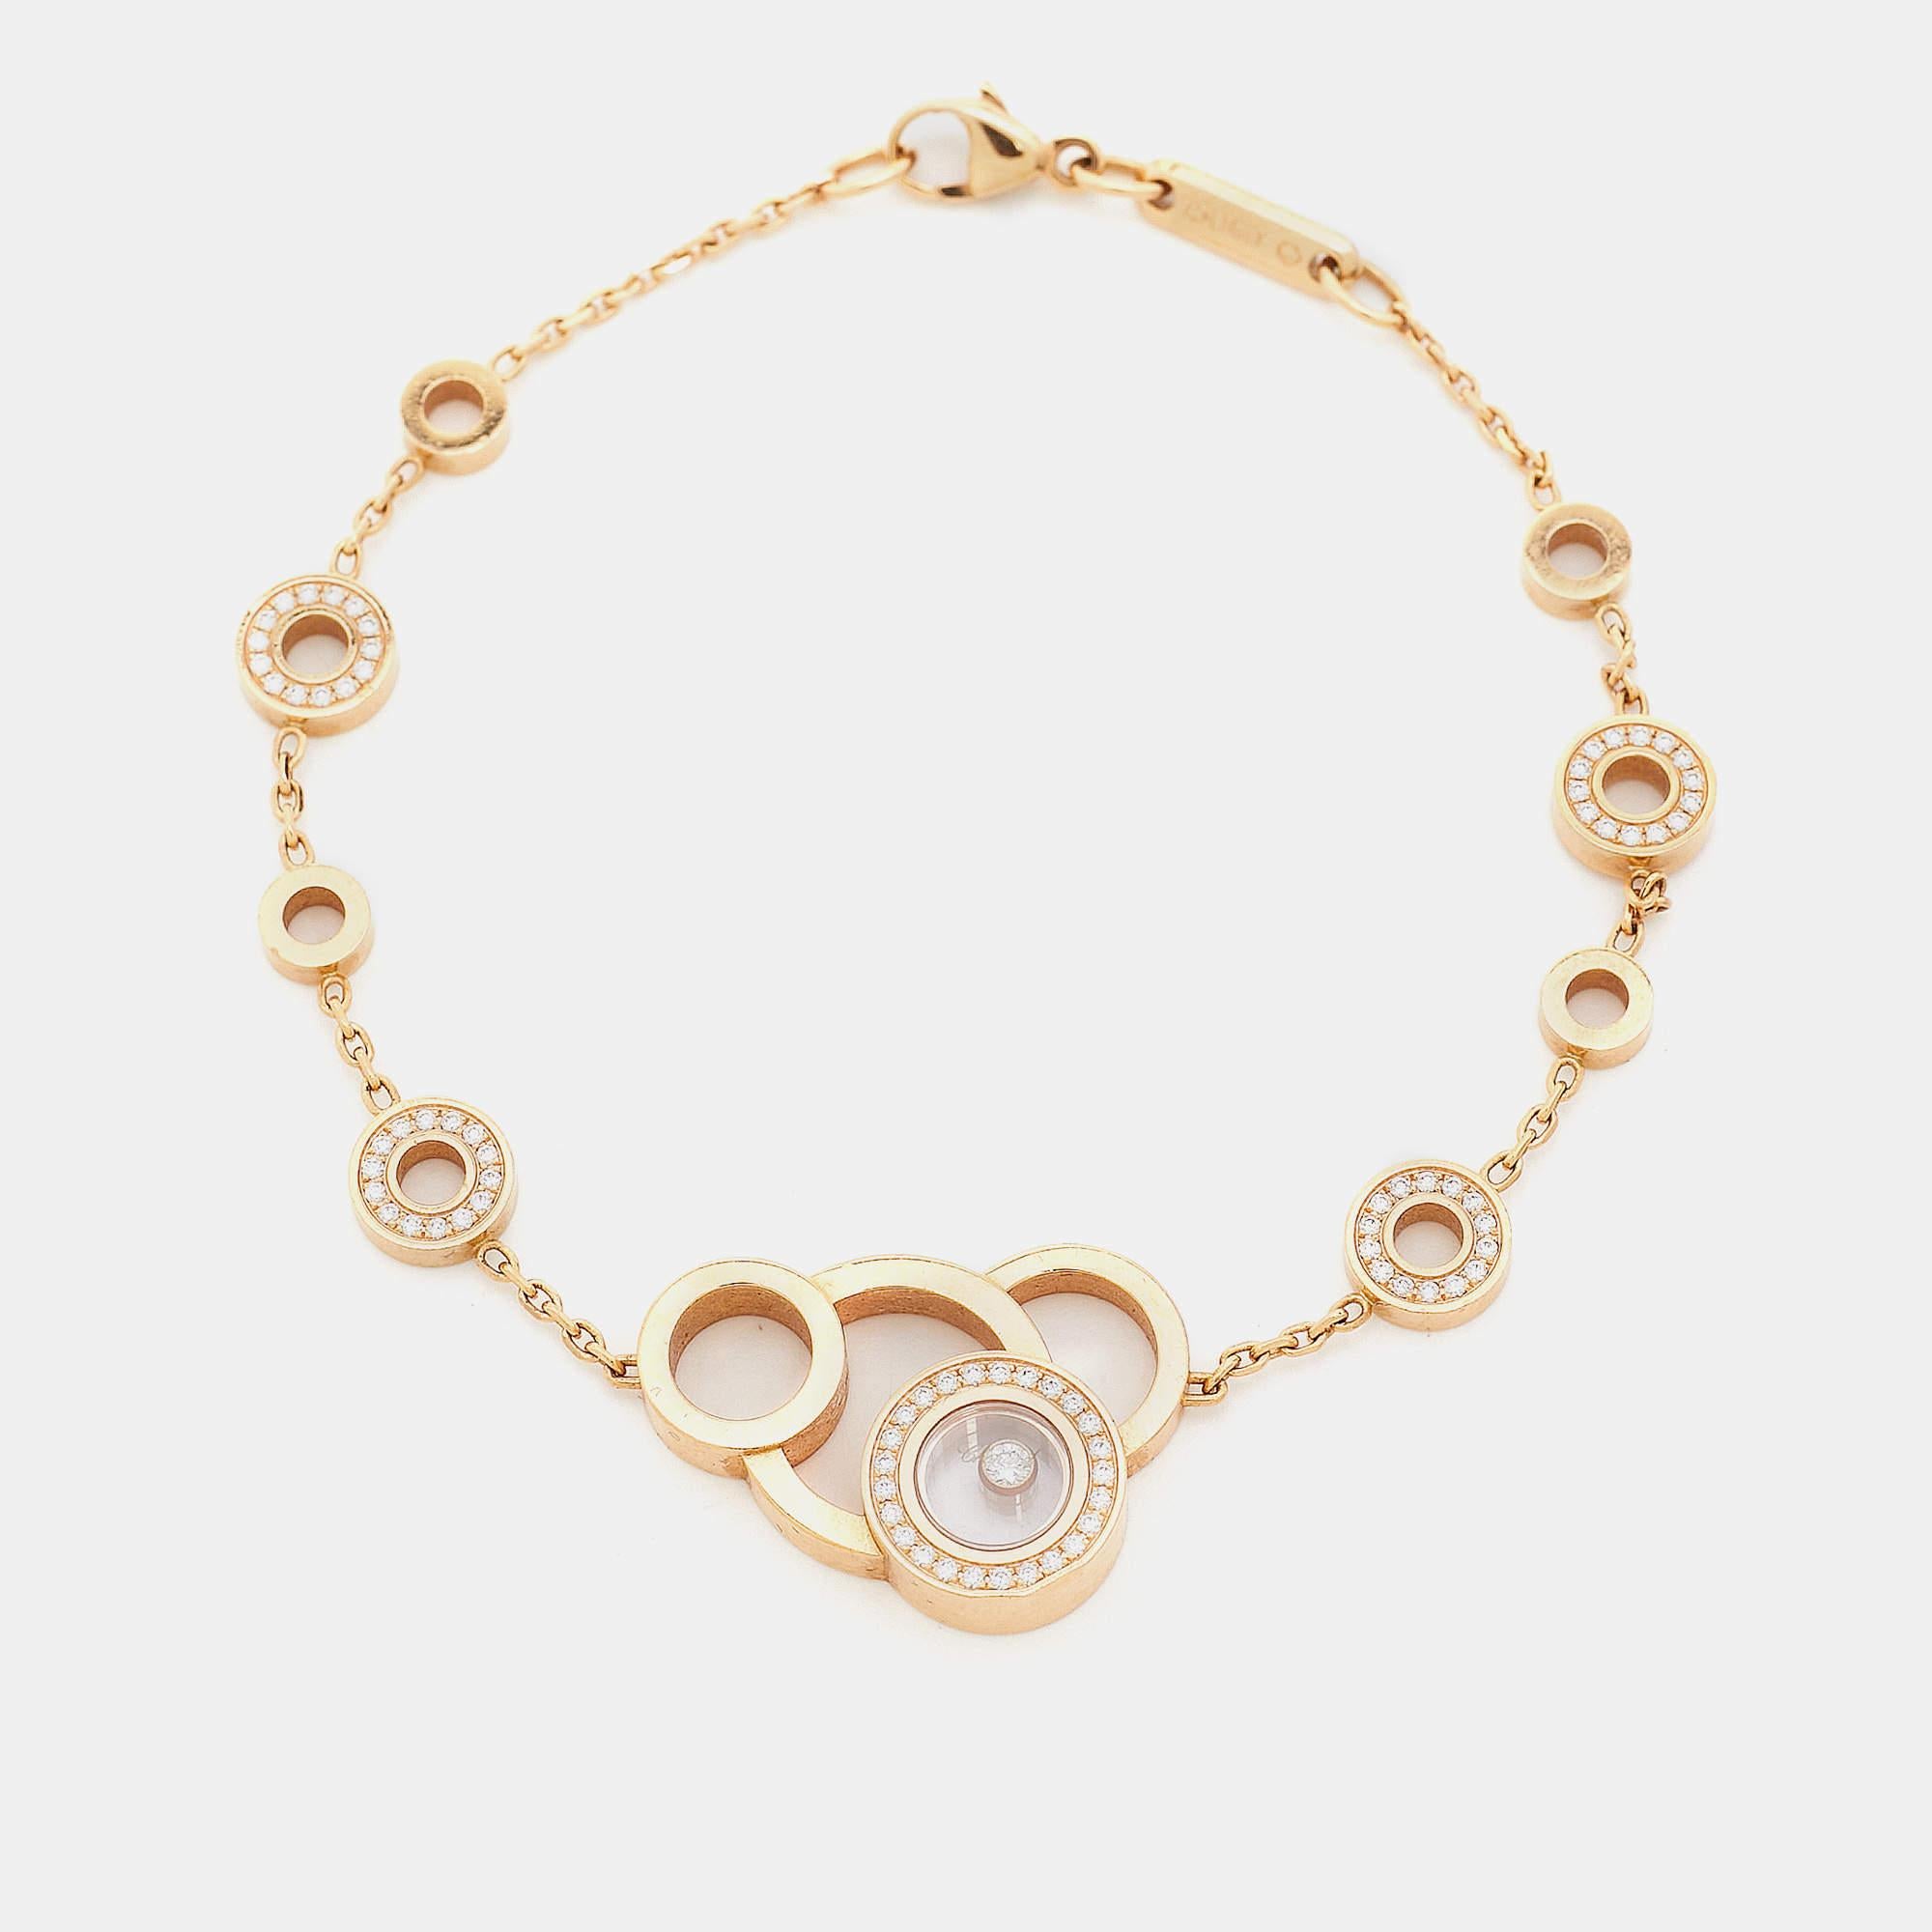 This Chopard bracelet is from the brand's Happy Diamonds Bubbles collection and it is made from 18k rose gold. It has little rings to resemble bubbles and one of them has a floating diamond. It'll be an elegant complement to your wrist.

